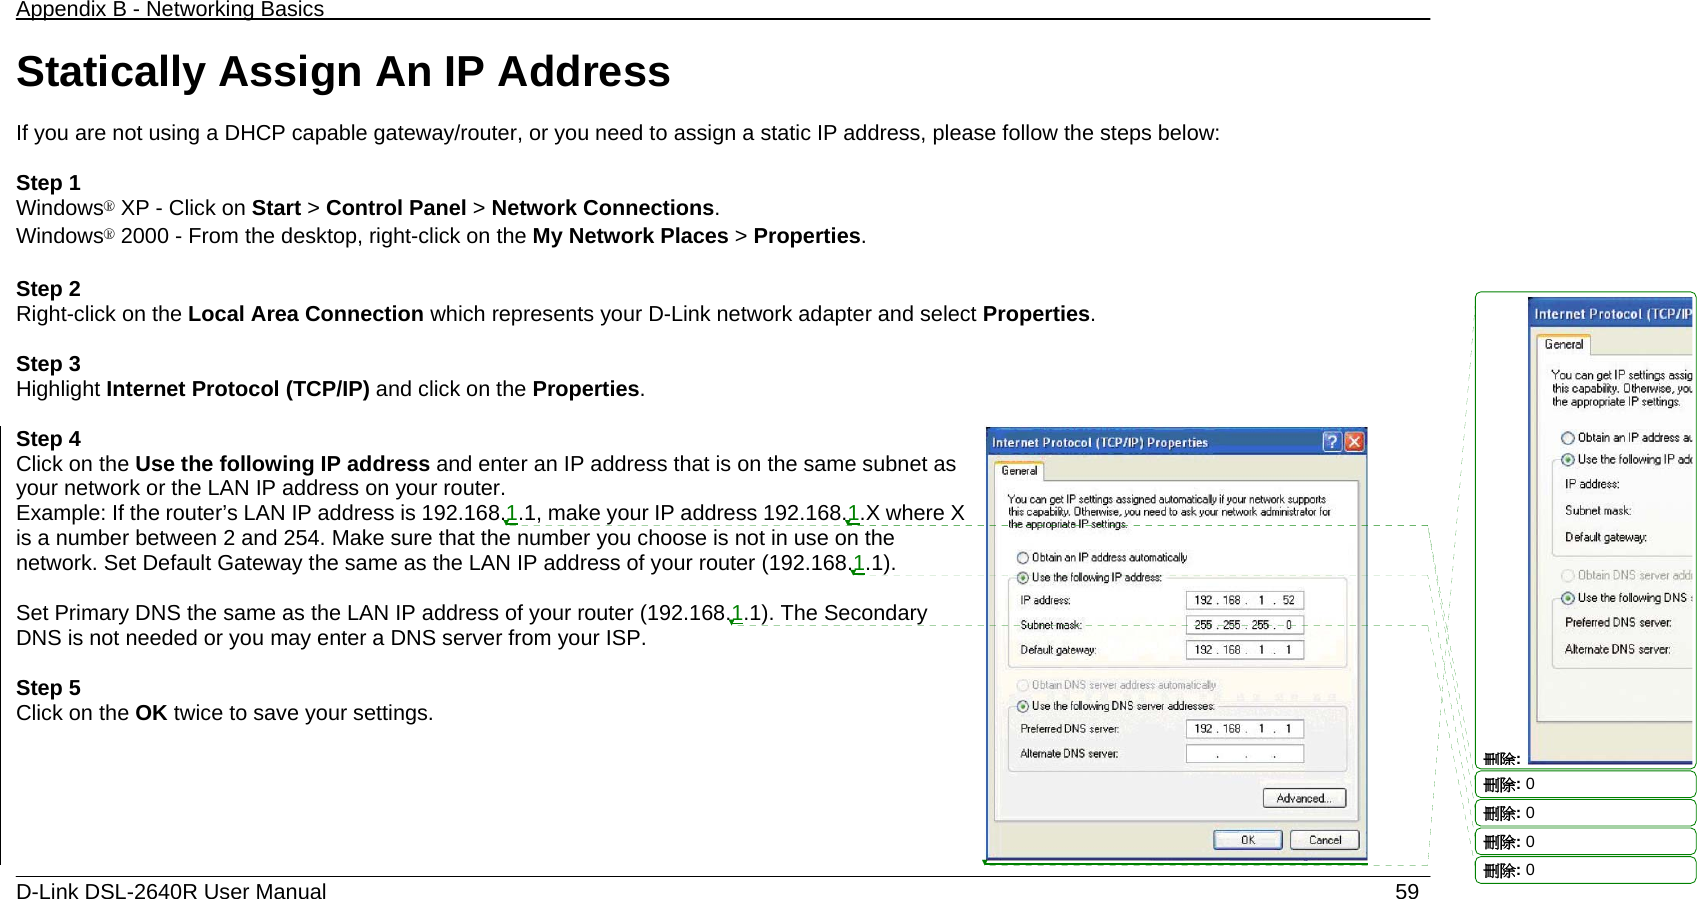 Appendix B - Networking Basics   D-Link DSL-2640R User Manual                           59Statically Assign An IP Address  If you are not using a DHCP capable gateway/router, or you need to assign a static IP address, please follow the steps below:  Step 1 Windows® XP - Click on Start &gt; Control Panel &gt; Network Connections. Windows® 2000 - From the desktop, right-click on the My Network Places &gt; Properties.  Step 2 Right-click on the Local Area Connection which represents your D-Link network adapter and select Properties.  Step 3 Highlight Internet Protocol (TCP/IP) and click on the Properties.  Step 4 Click on the Use the following IP address and enter an IP address that is on the same subnet as your network or the LAN IP address on your router. Example: If the router’s LAN IP address is 192.168.1.1, make your IP address 192.168.1.X where X is a number between 2 and 254. Make sure that the number you choose is not in use on the network. Set Default Gateway the same as the LAN IP address of your router (192.168.1.1).  Set Primary DNS the same as the LAN IP address of your router (192.168.1.1). The Secondary DNS is not needed or you may enter a DNS server from your ISP.  Step 5 Click on the OK twice to save your settings.   刪除: 刪除: 0刪除: 0刪除: 0刪除: 0